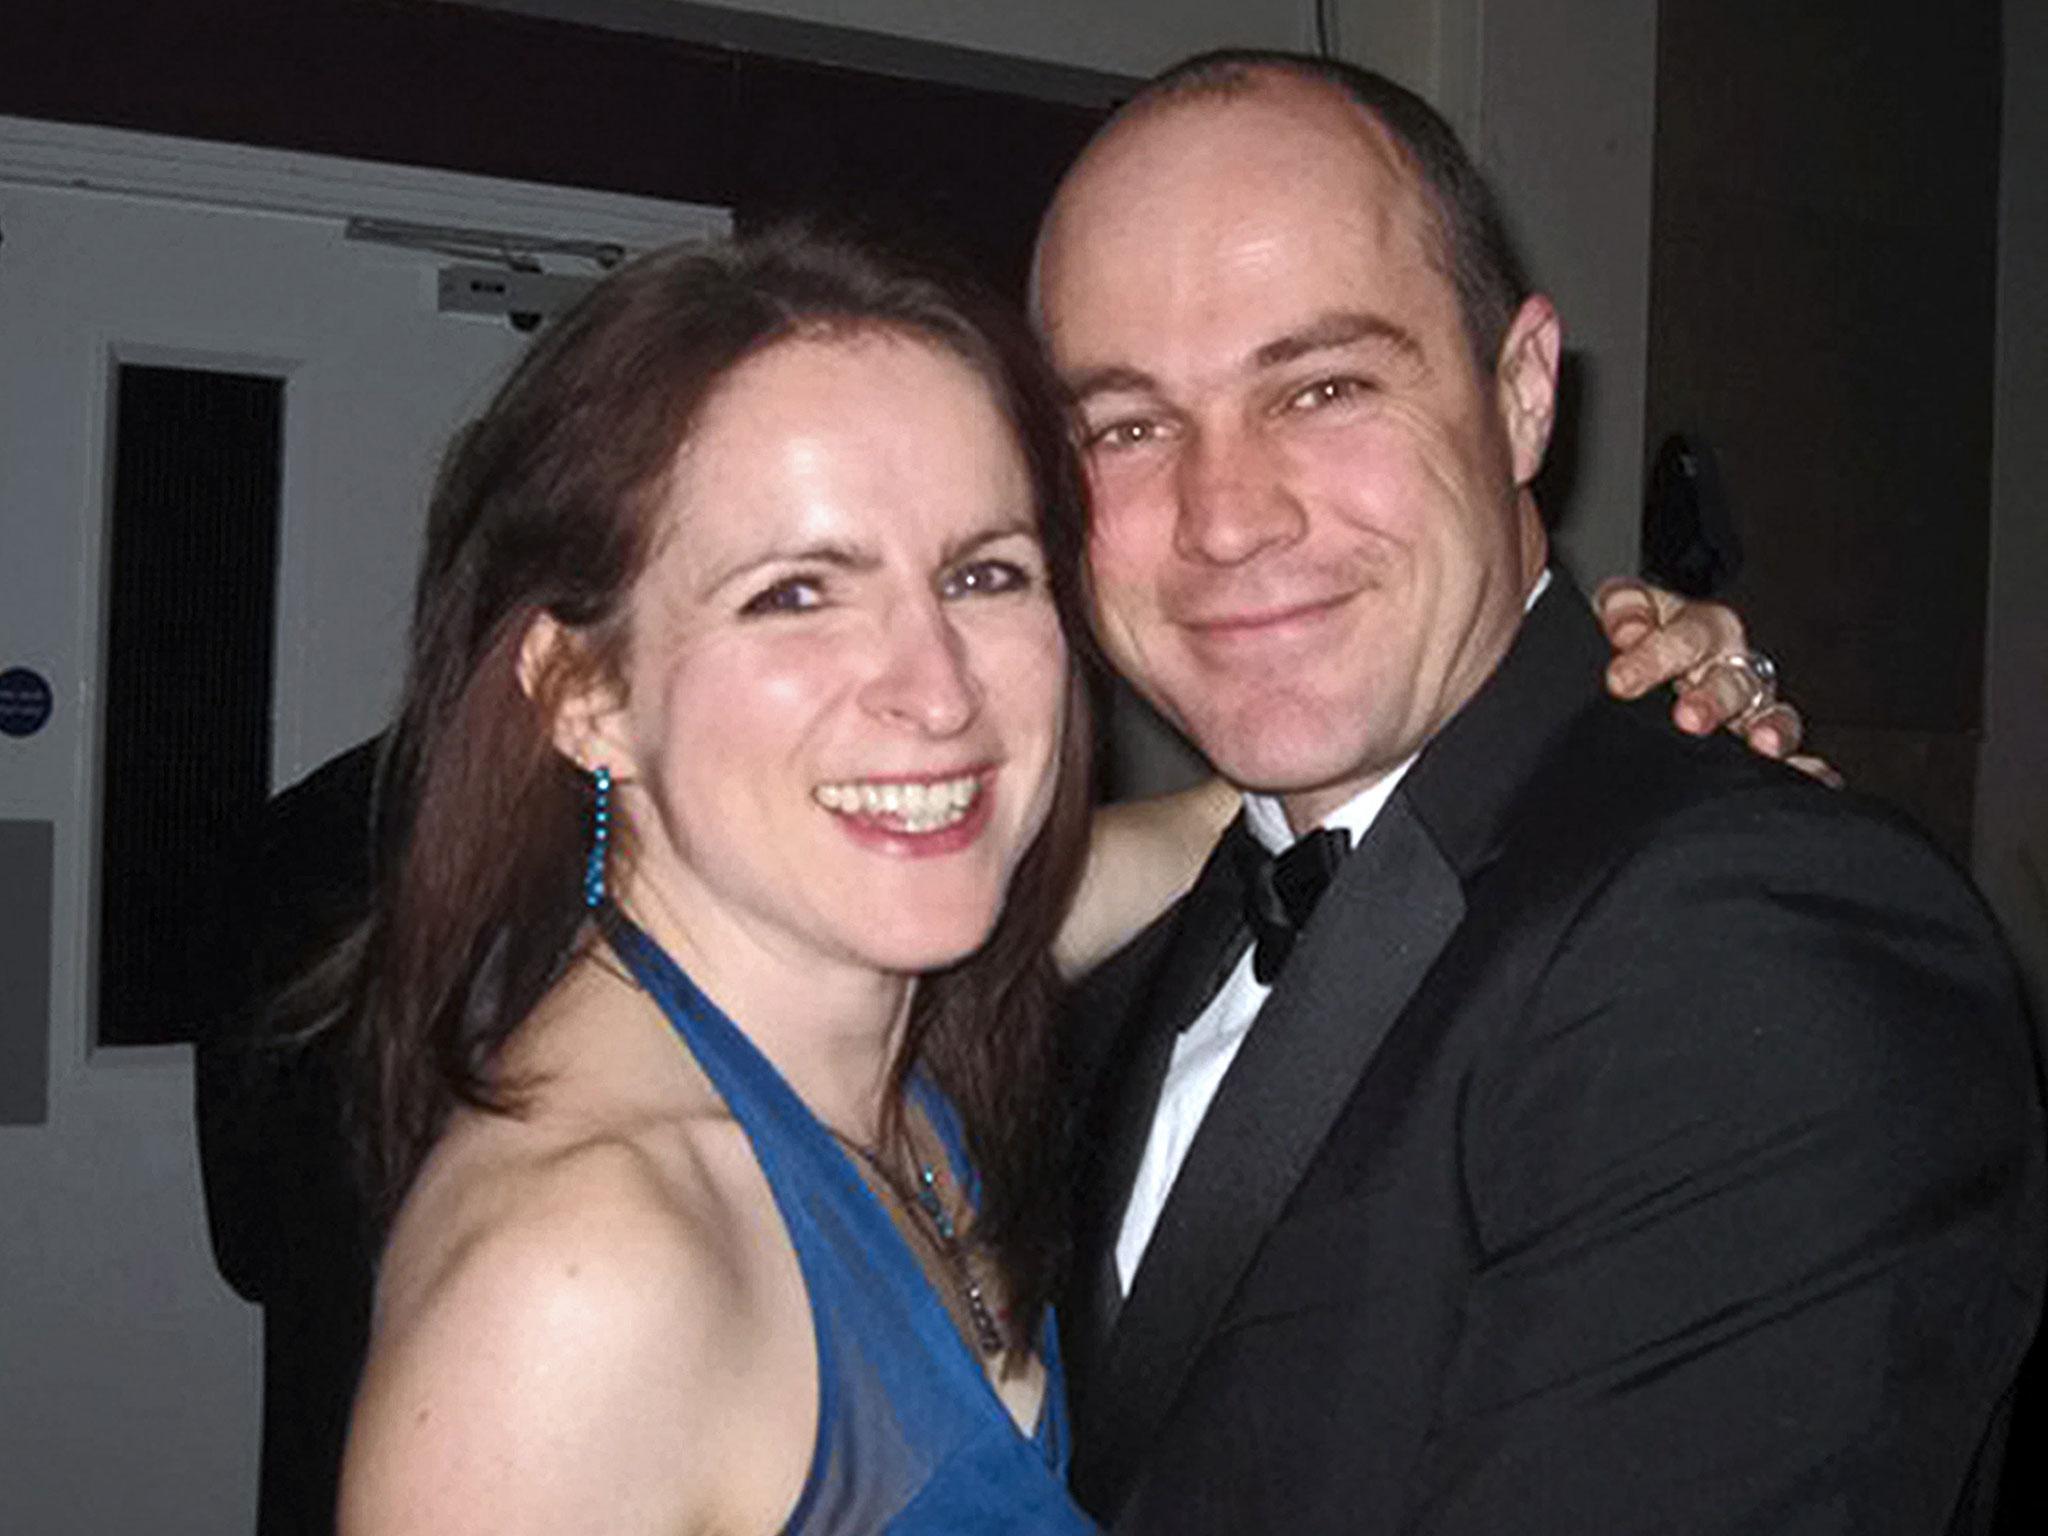 Emile Cilliers was charged with attempting to murder his wife Victoria during a skydive